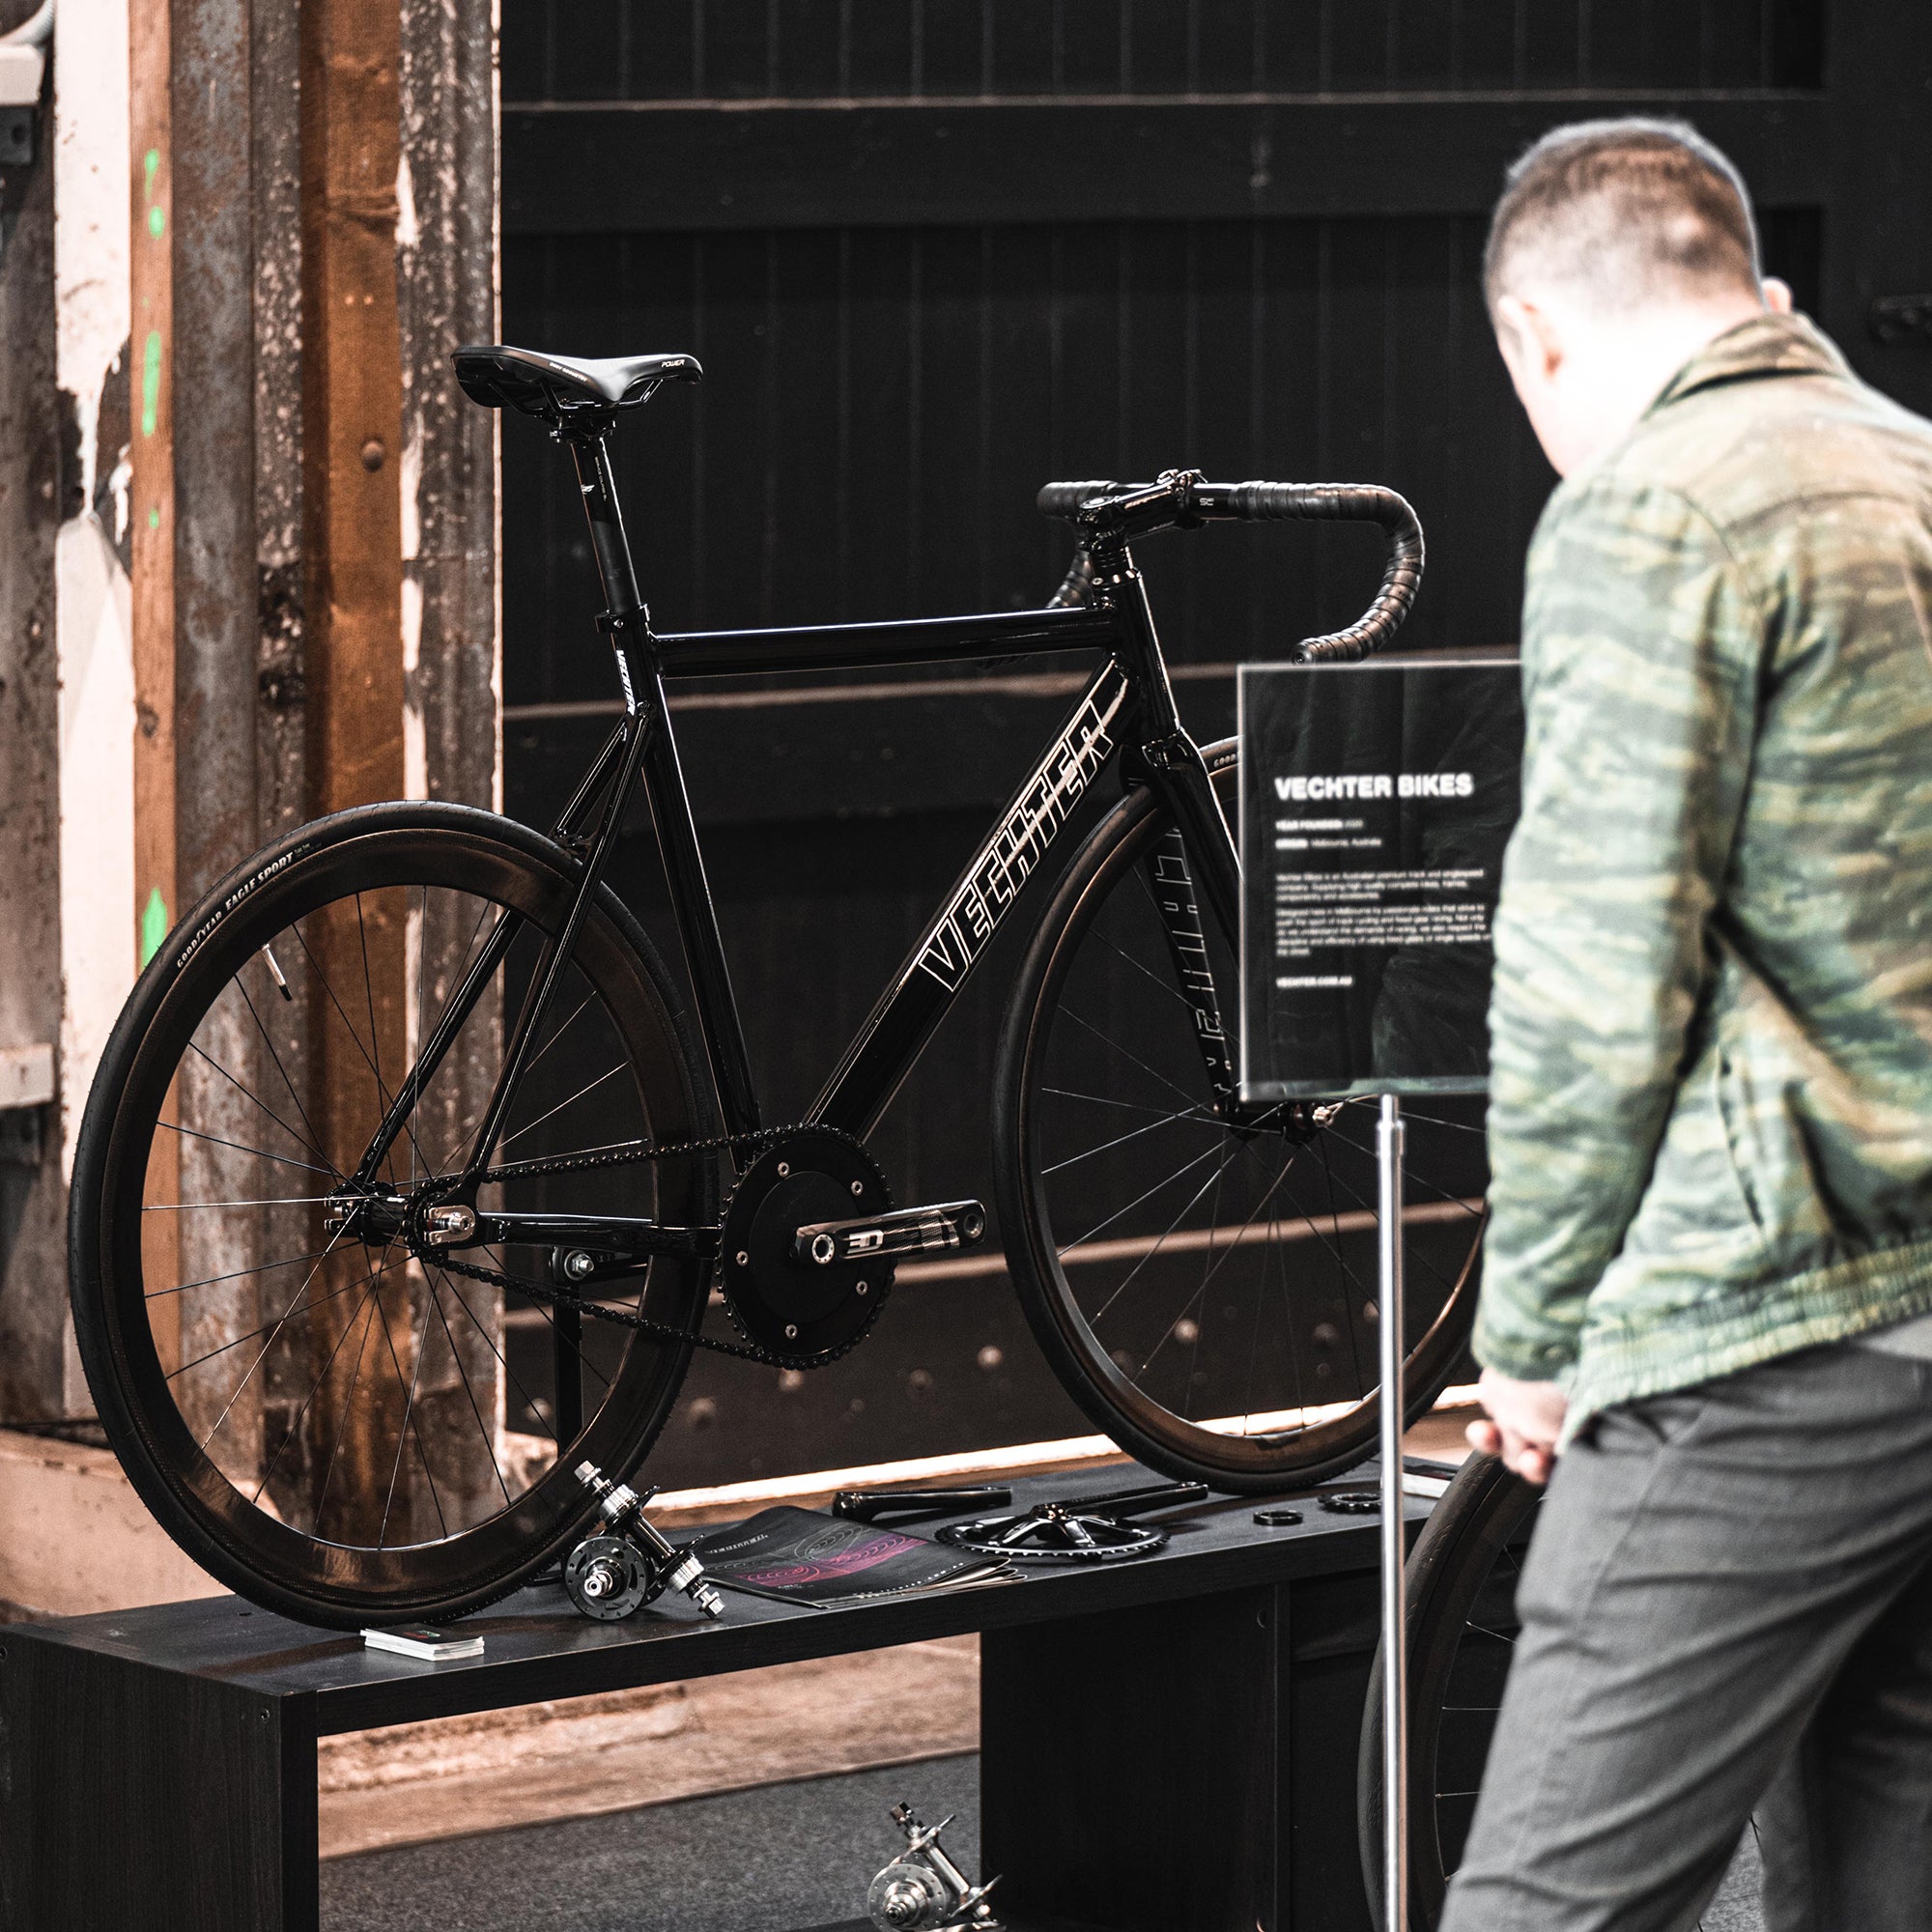 Vechter bikes showcase at the HMBS Hand Made Bicycle Show 2021